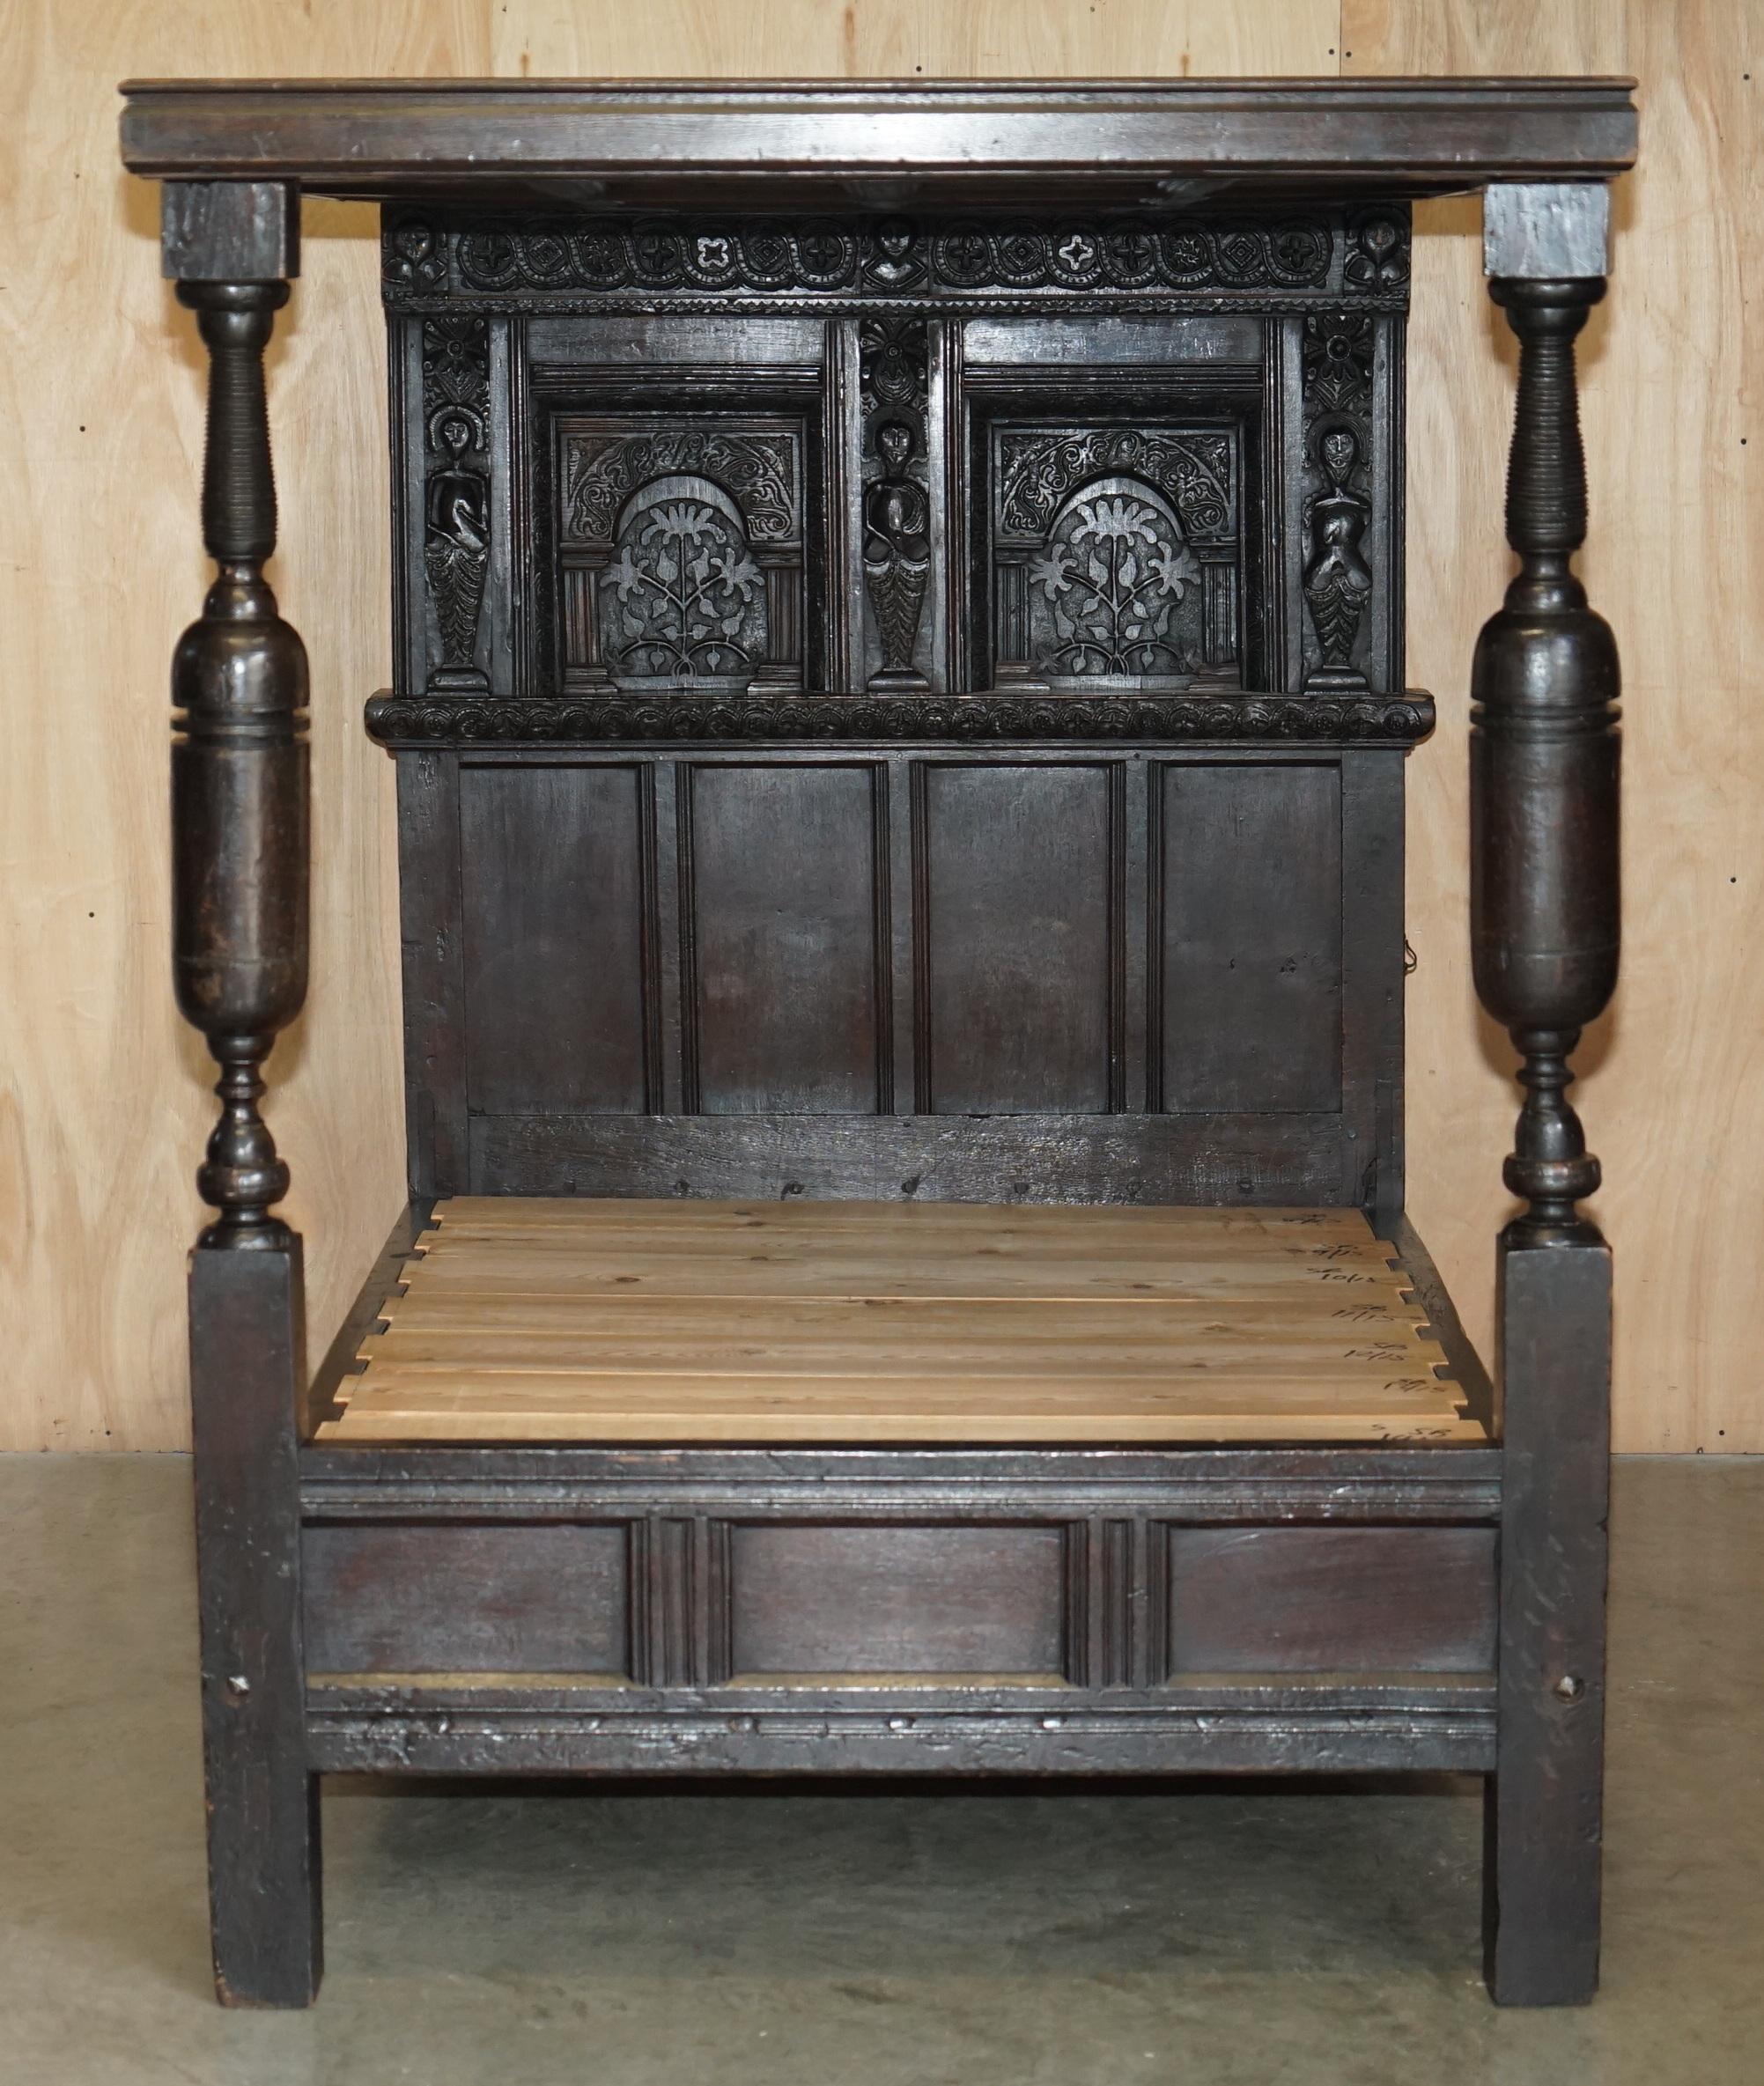 17TH CENTURY JACOBEAN WILLIAM III CIRCA 1650 ENGLiSH OAK TESTER FOUR POSTER BED For Sale 4